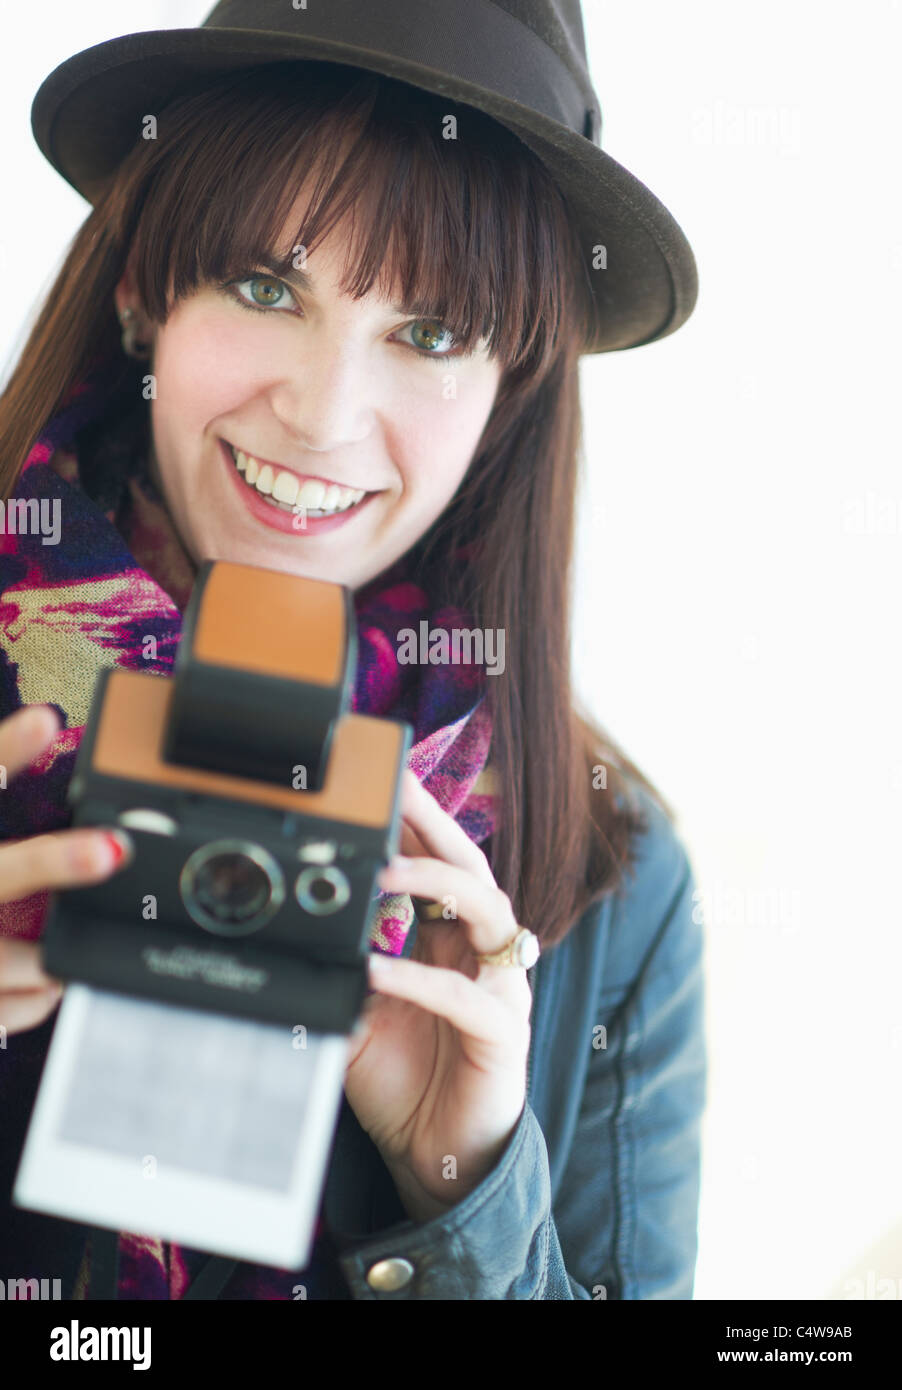 Portrait of young woman with instant camera Stock Photo